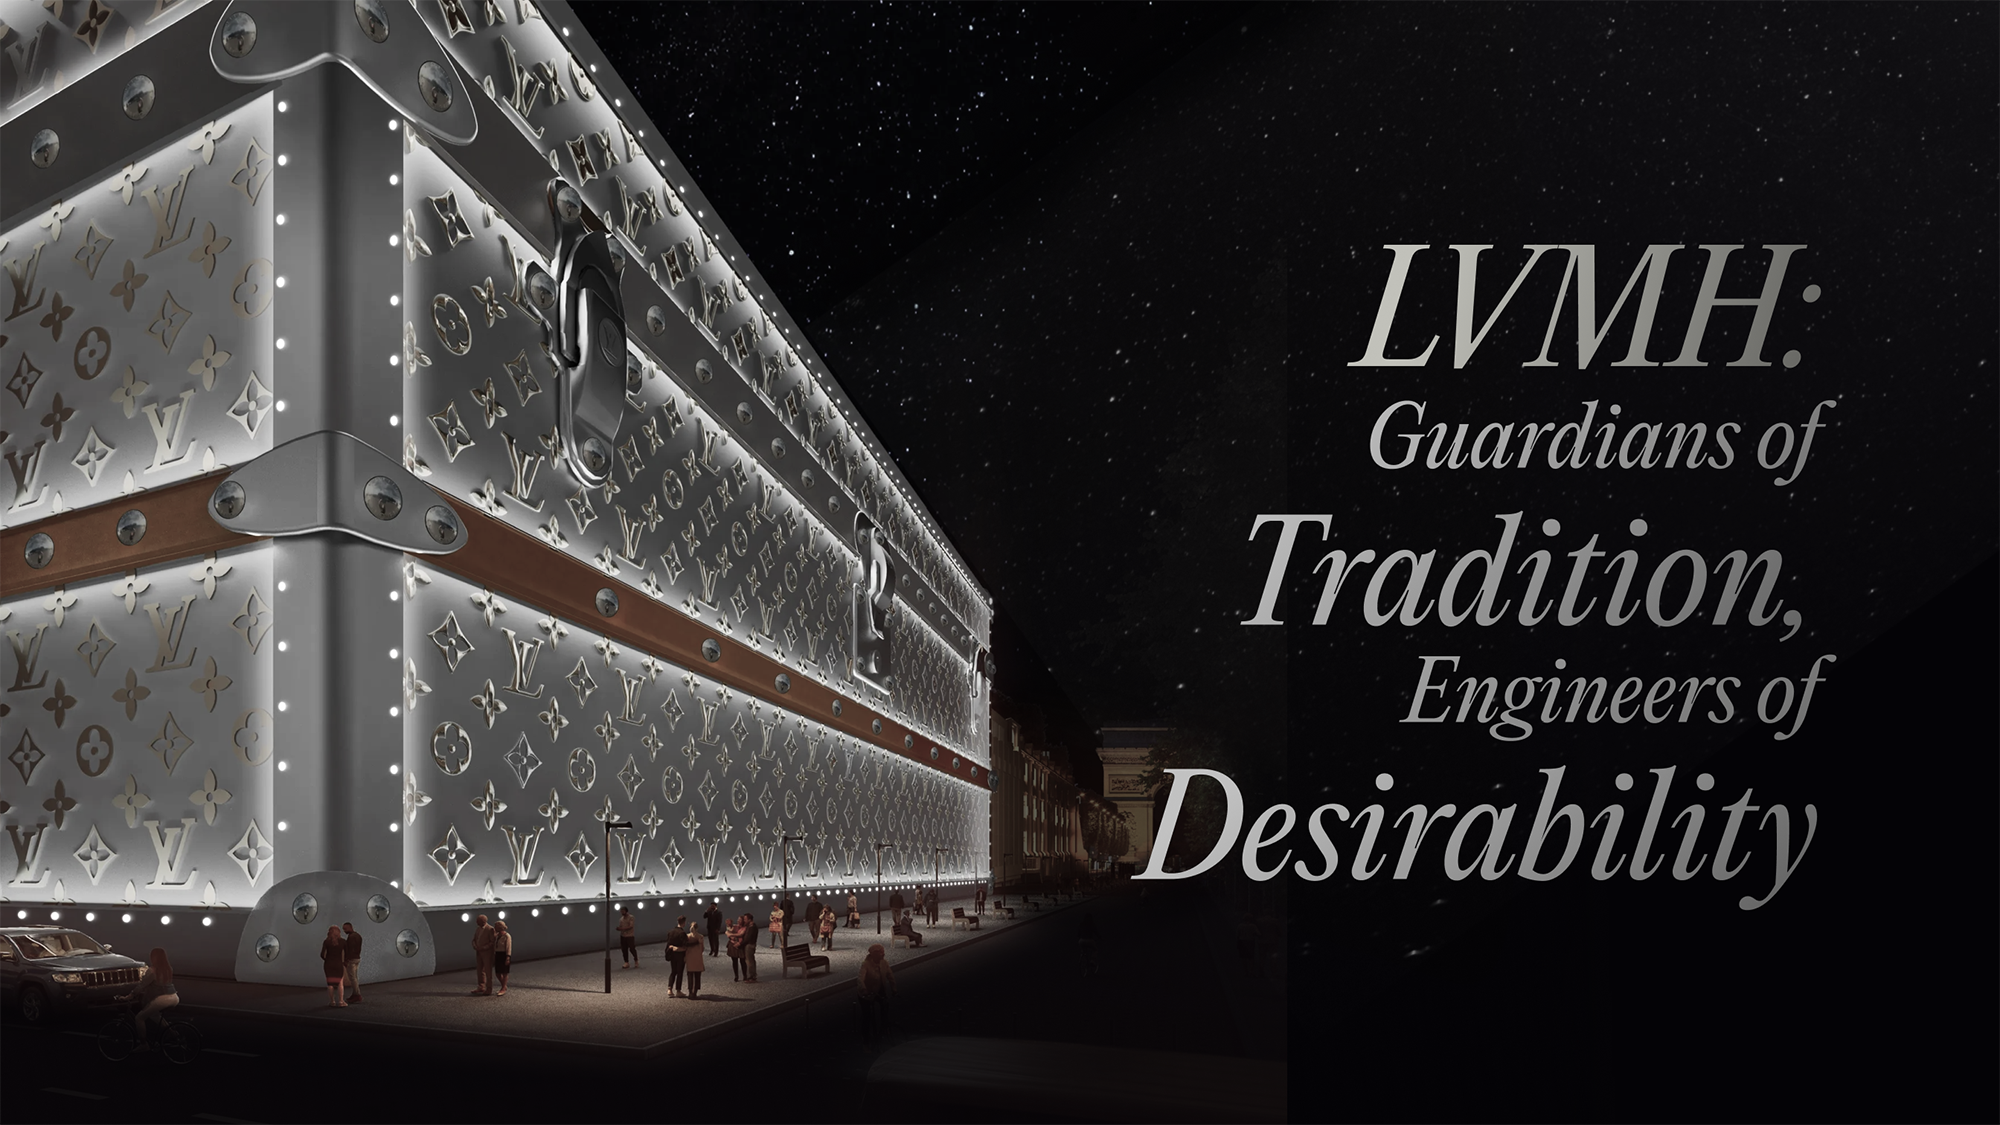 LVMH: Guardians of Tradition, Engineers of Desirability